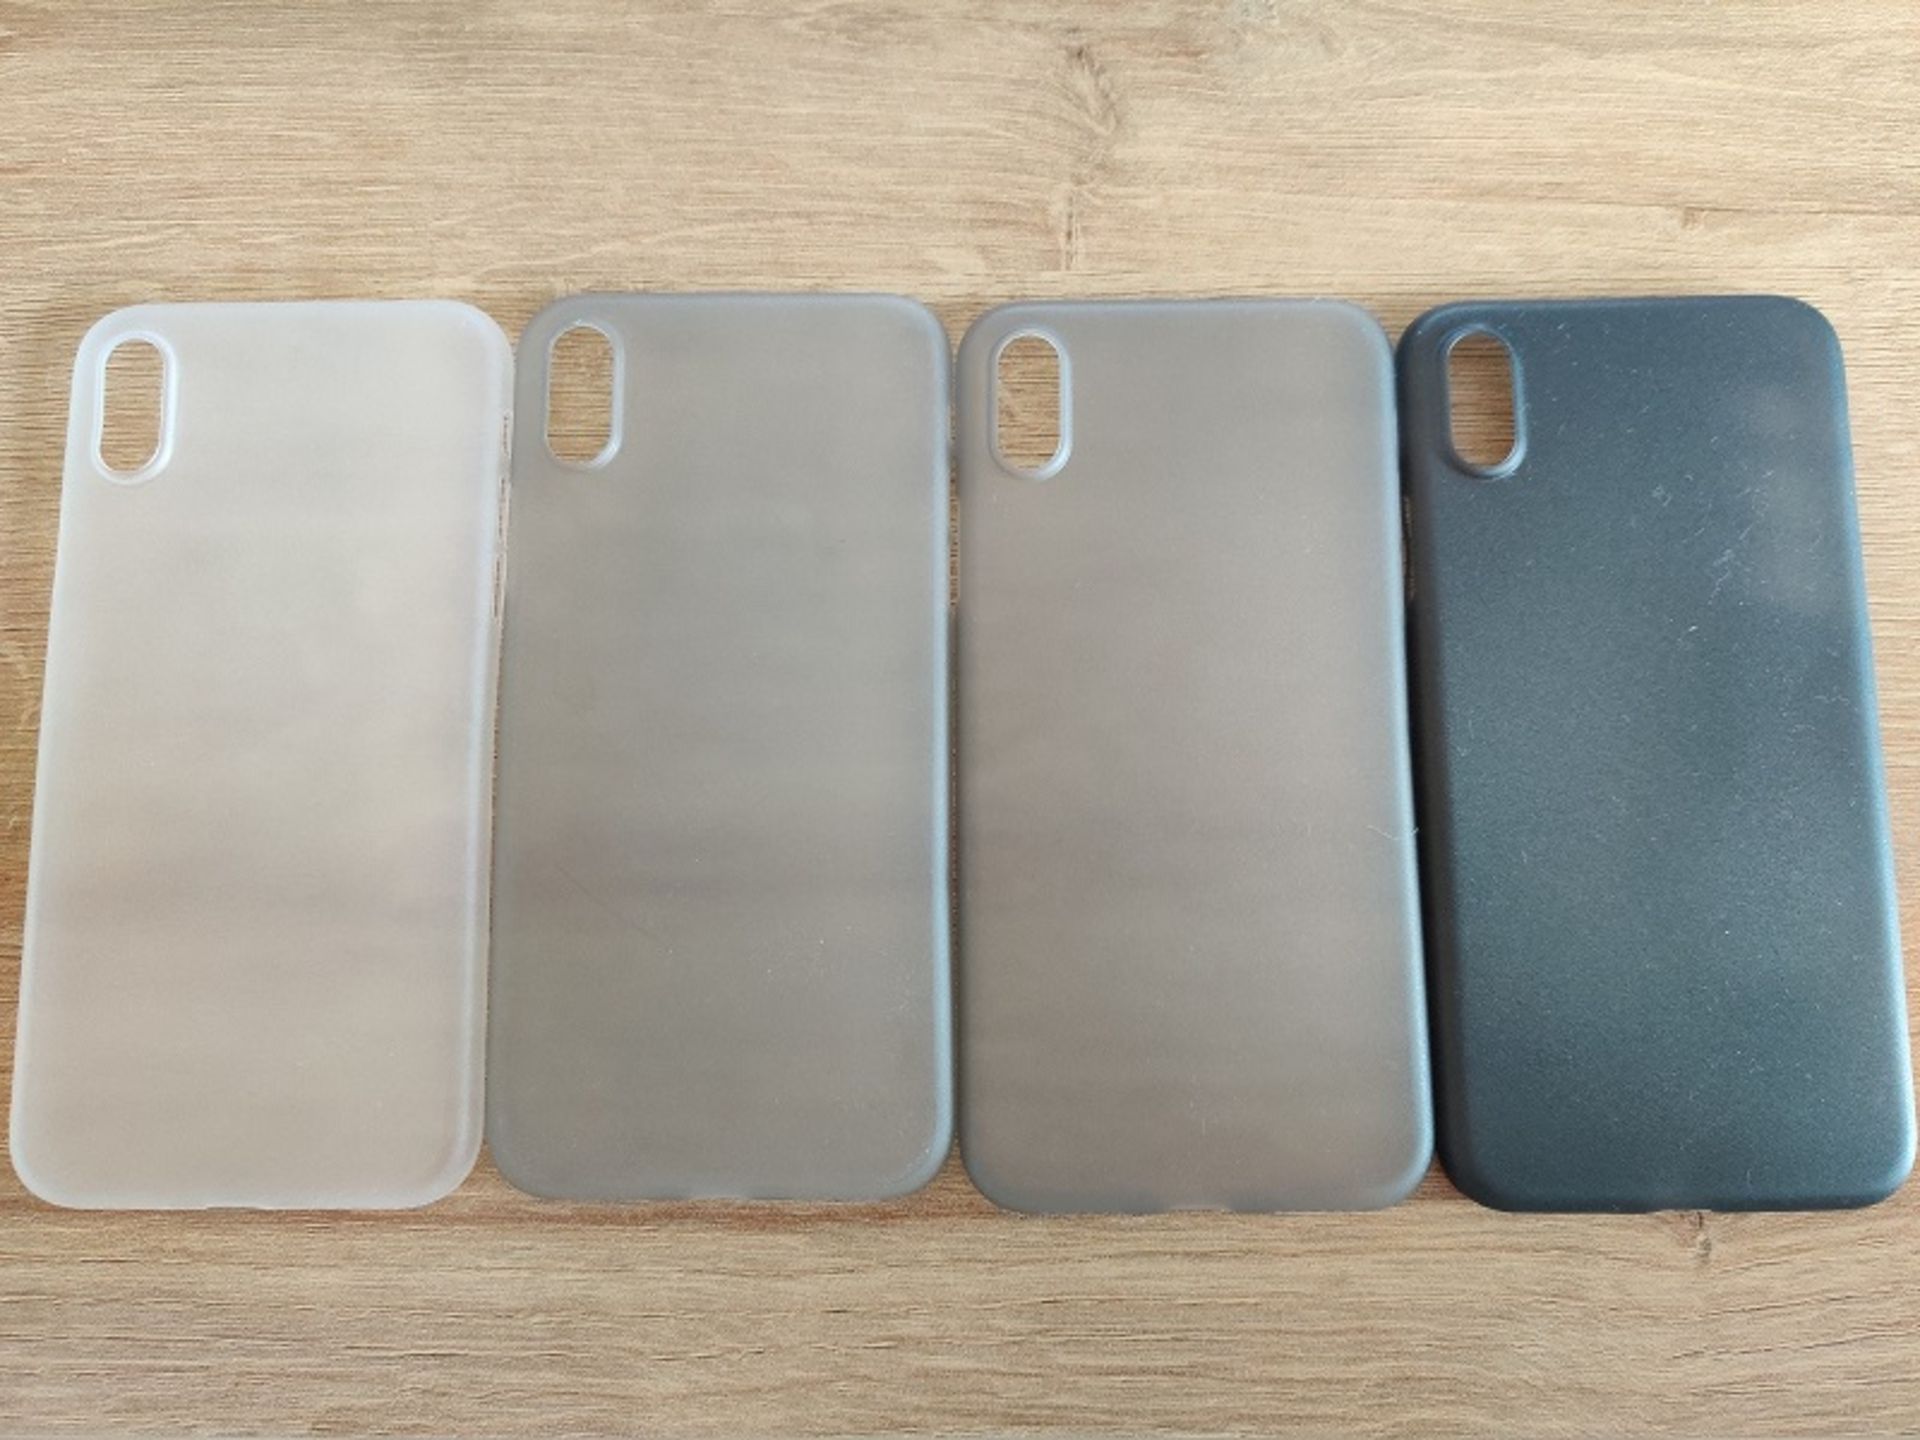 4 X ULTRA THIN 0.2MM PLASTIC CASE COVERS FOR IPHONE X/XS, CLEAR, LIGHT GREY AND DARK GREY *NO VAT* - Image 3 of 3